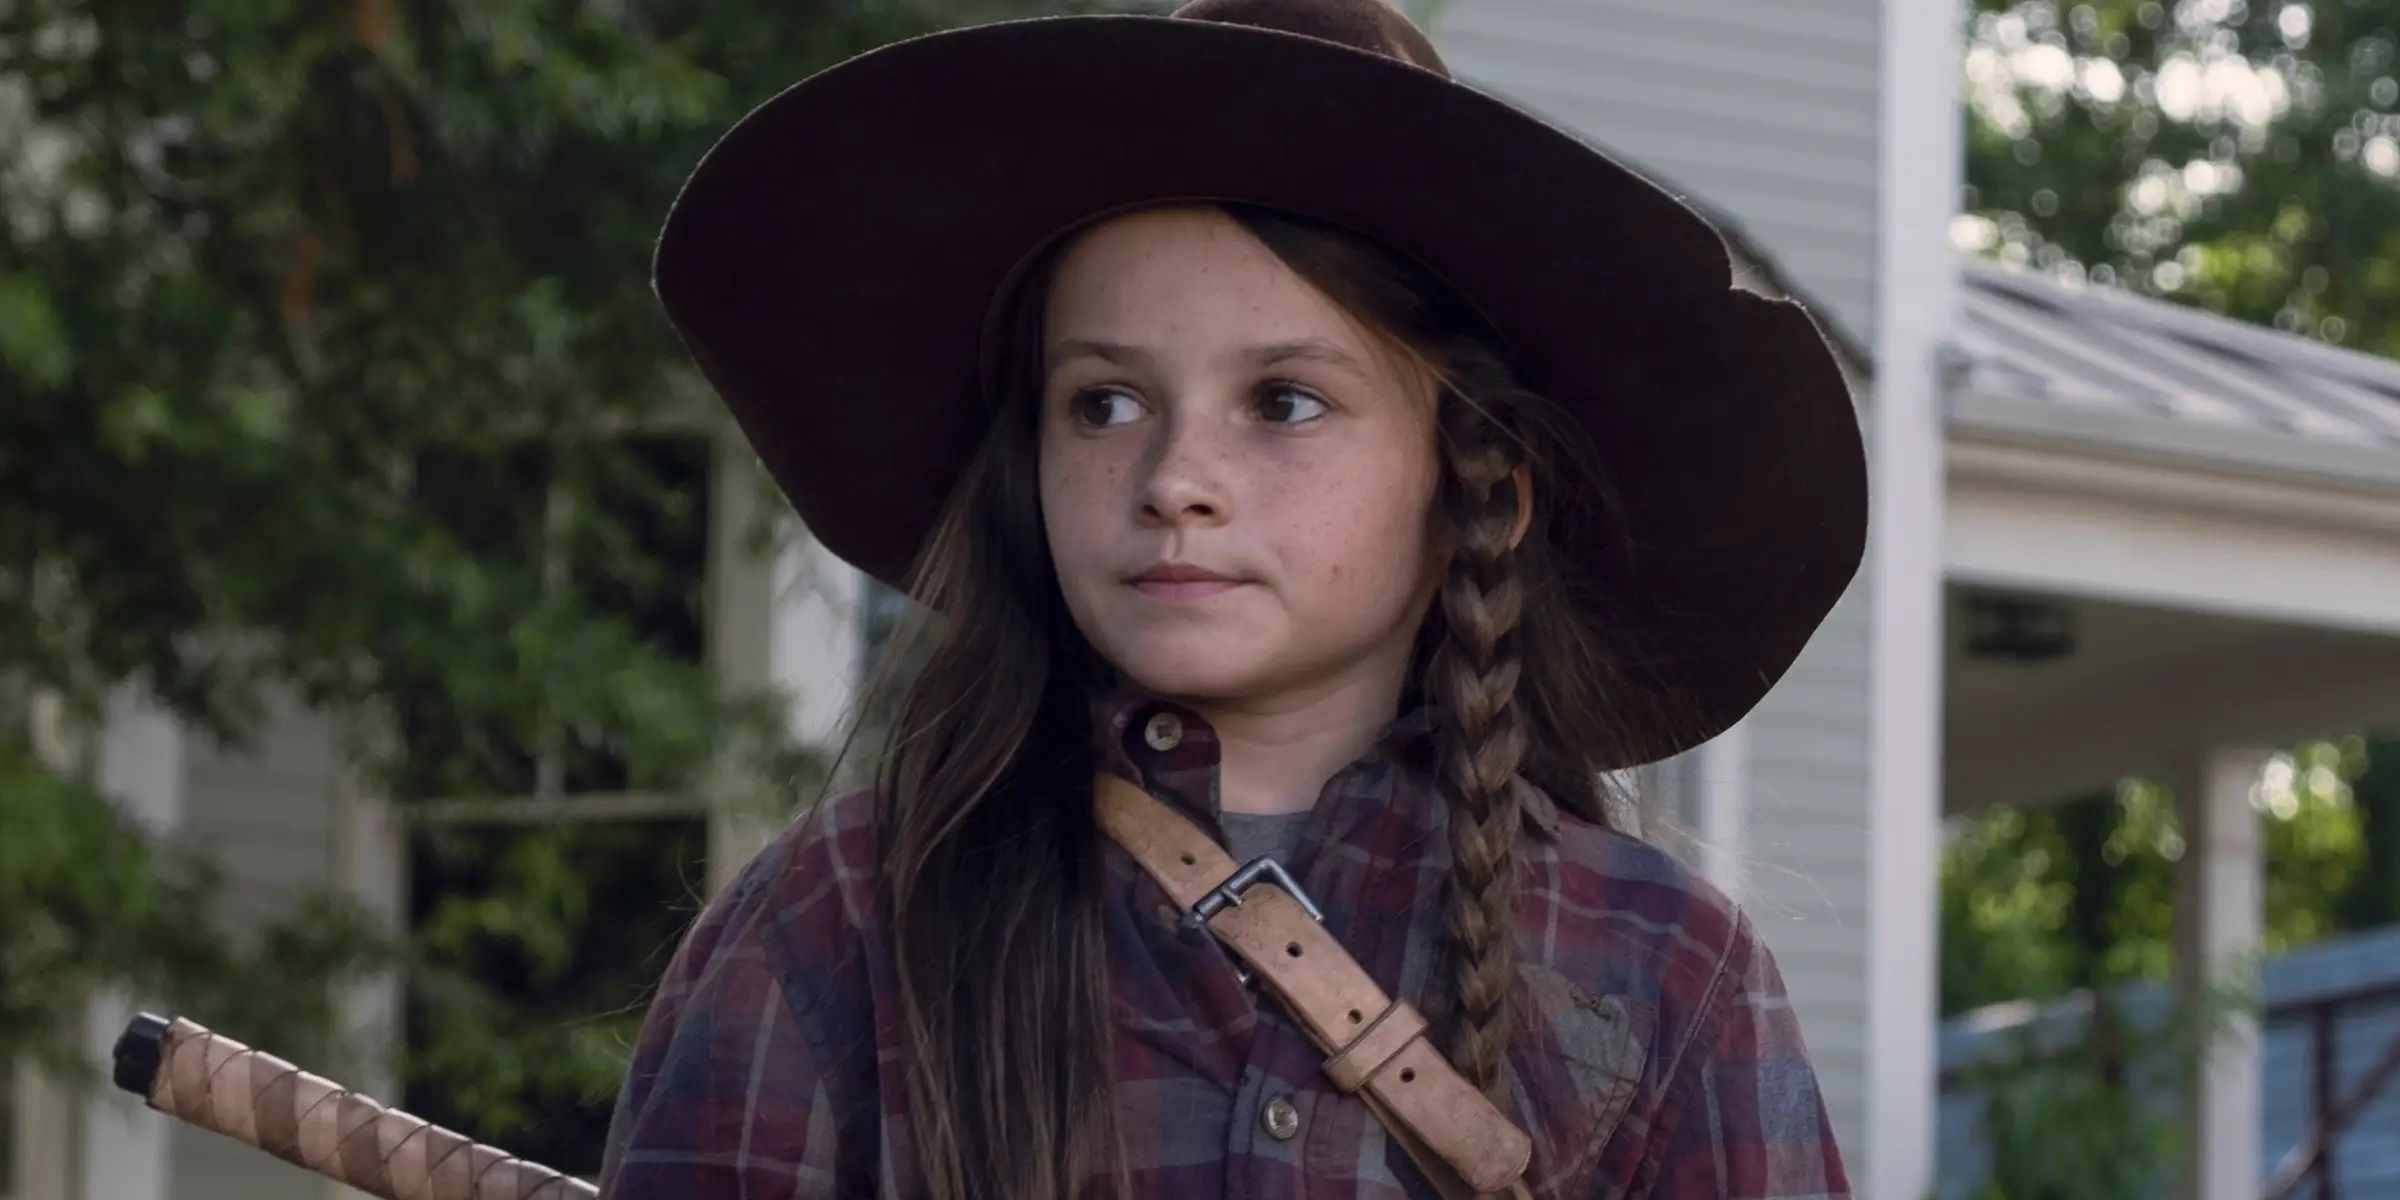 Judith Grimes wears her father's hat as she walks through Alexandria in 'The Walking Dead'